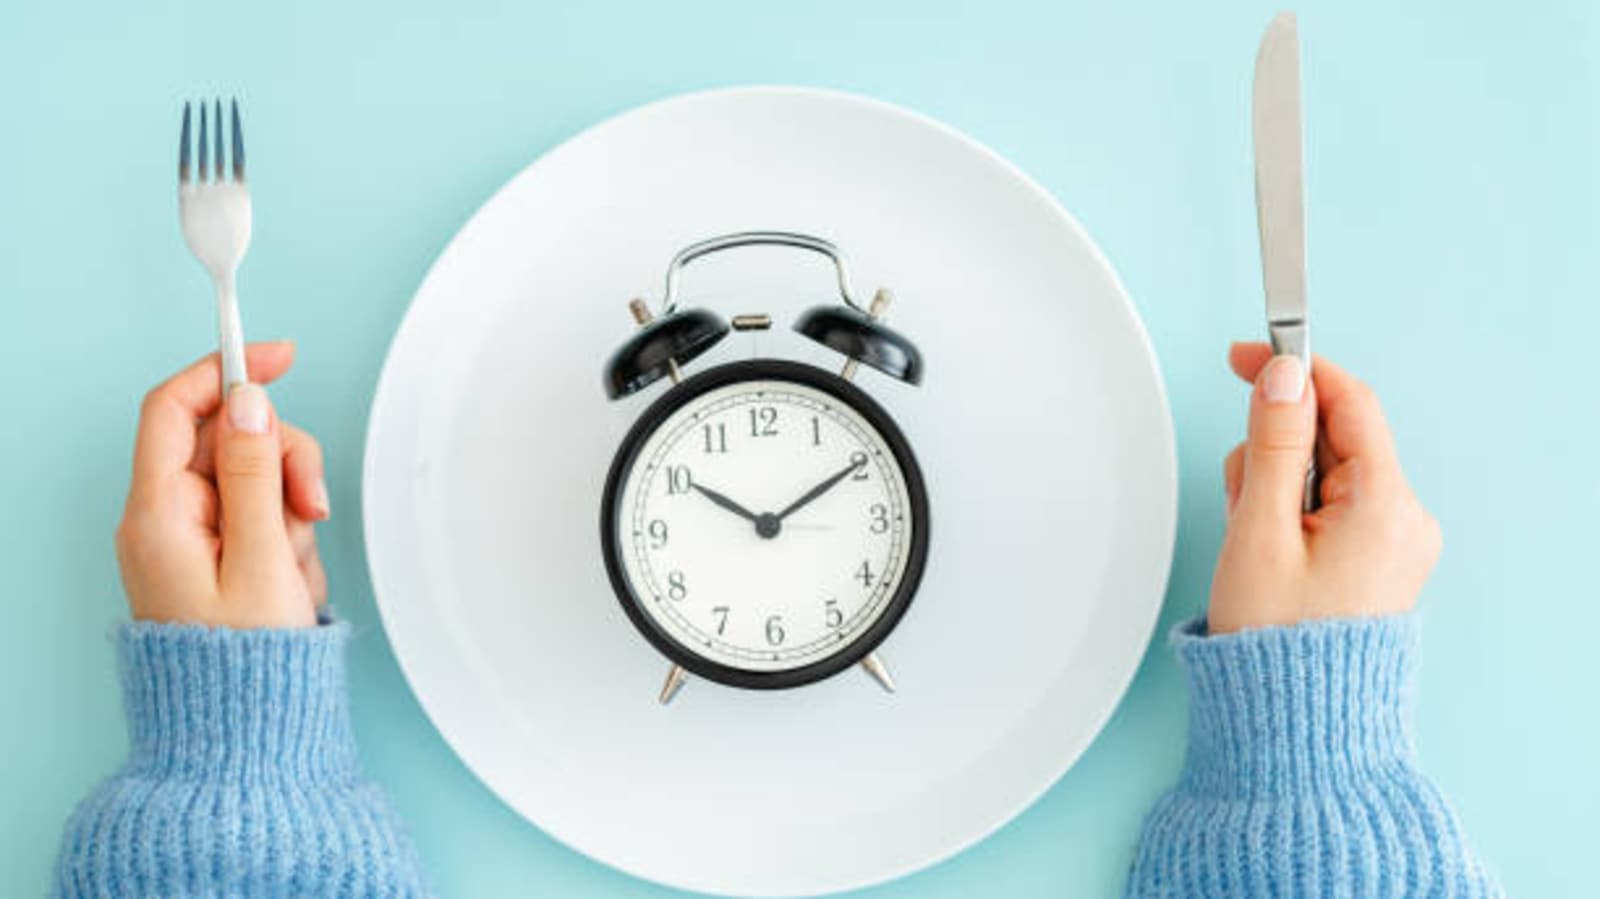 intermittent-fasting-can-affect-female-hormones-research